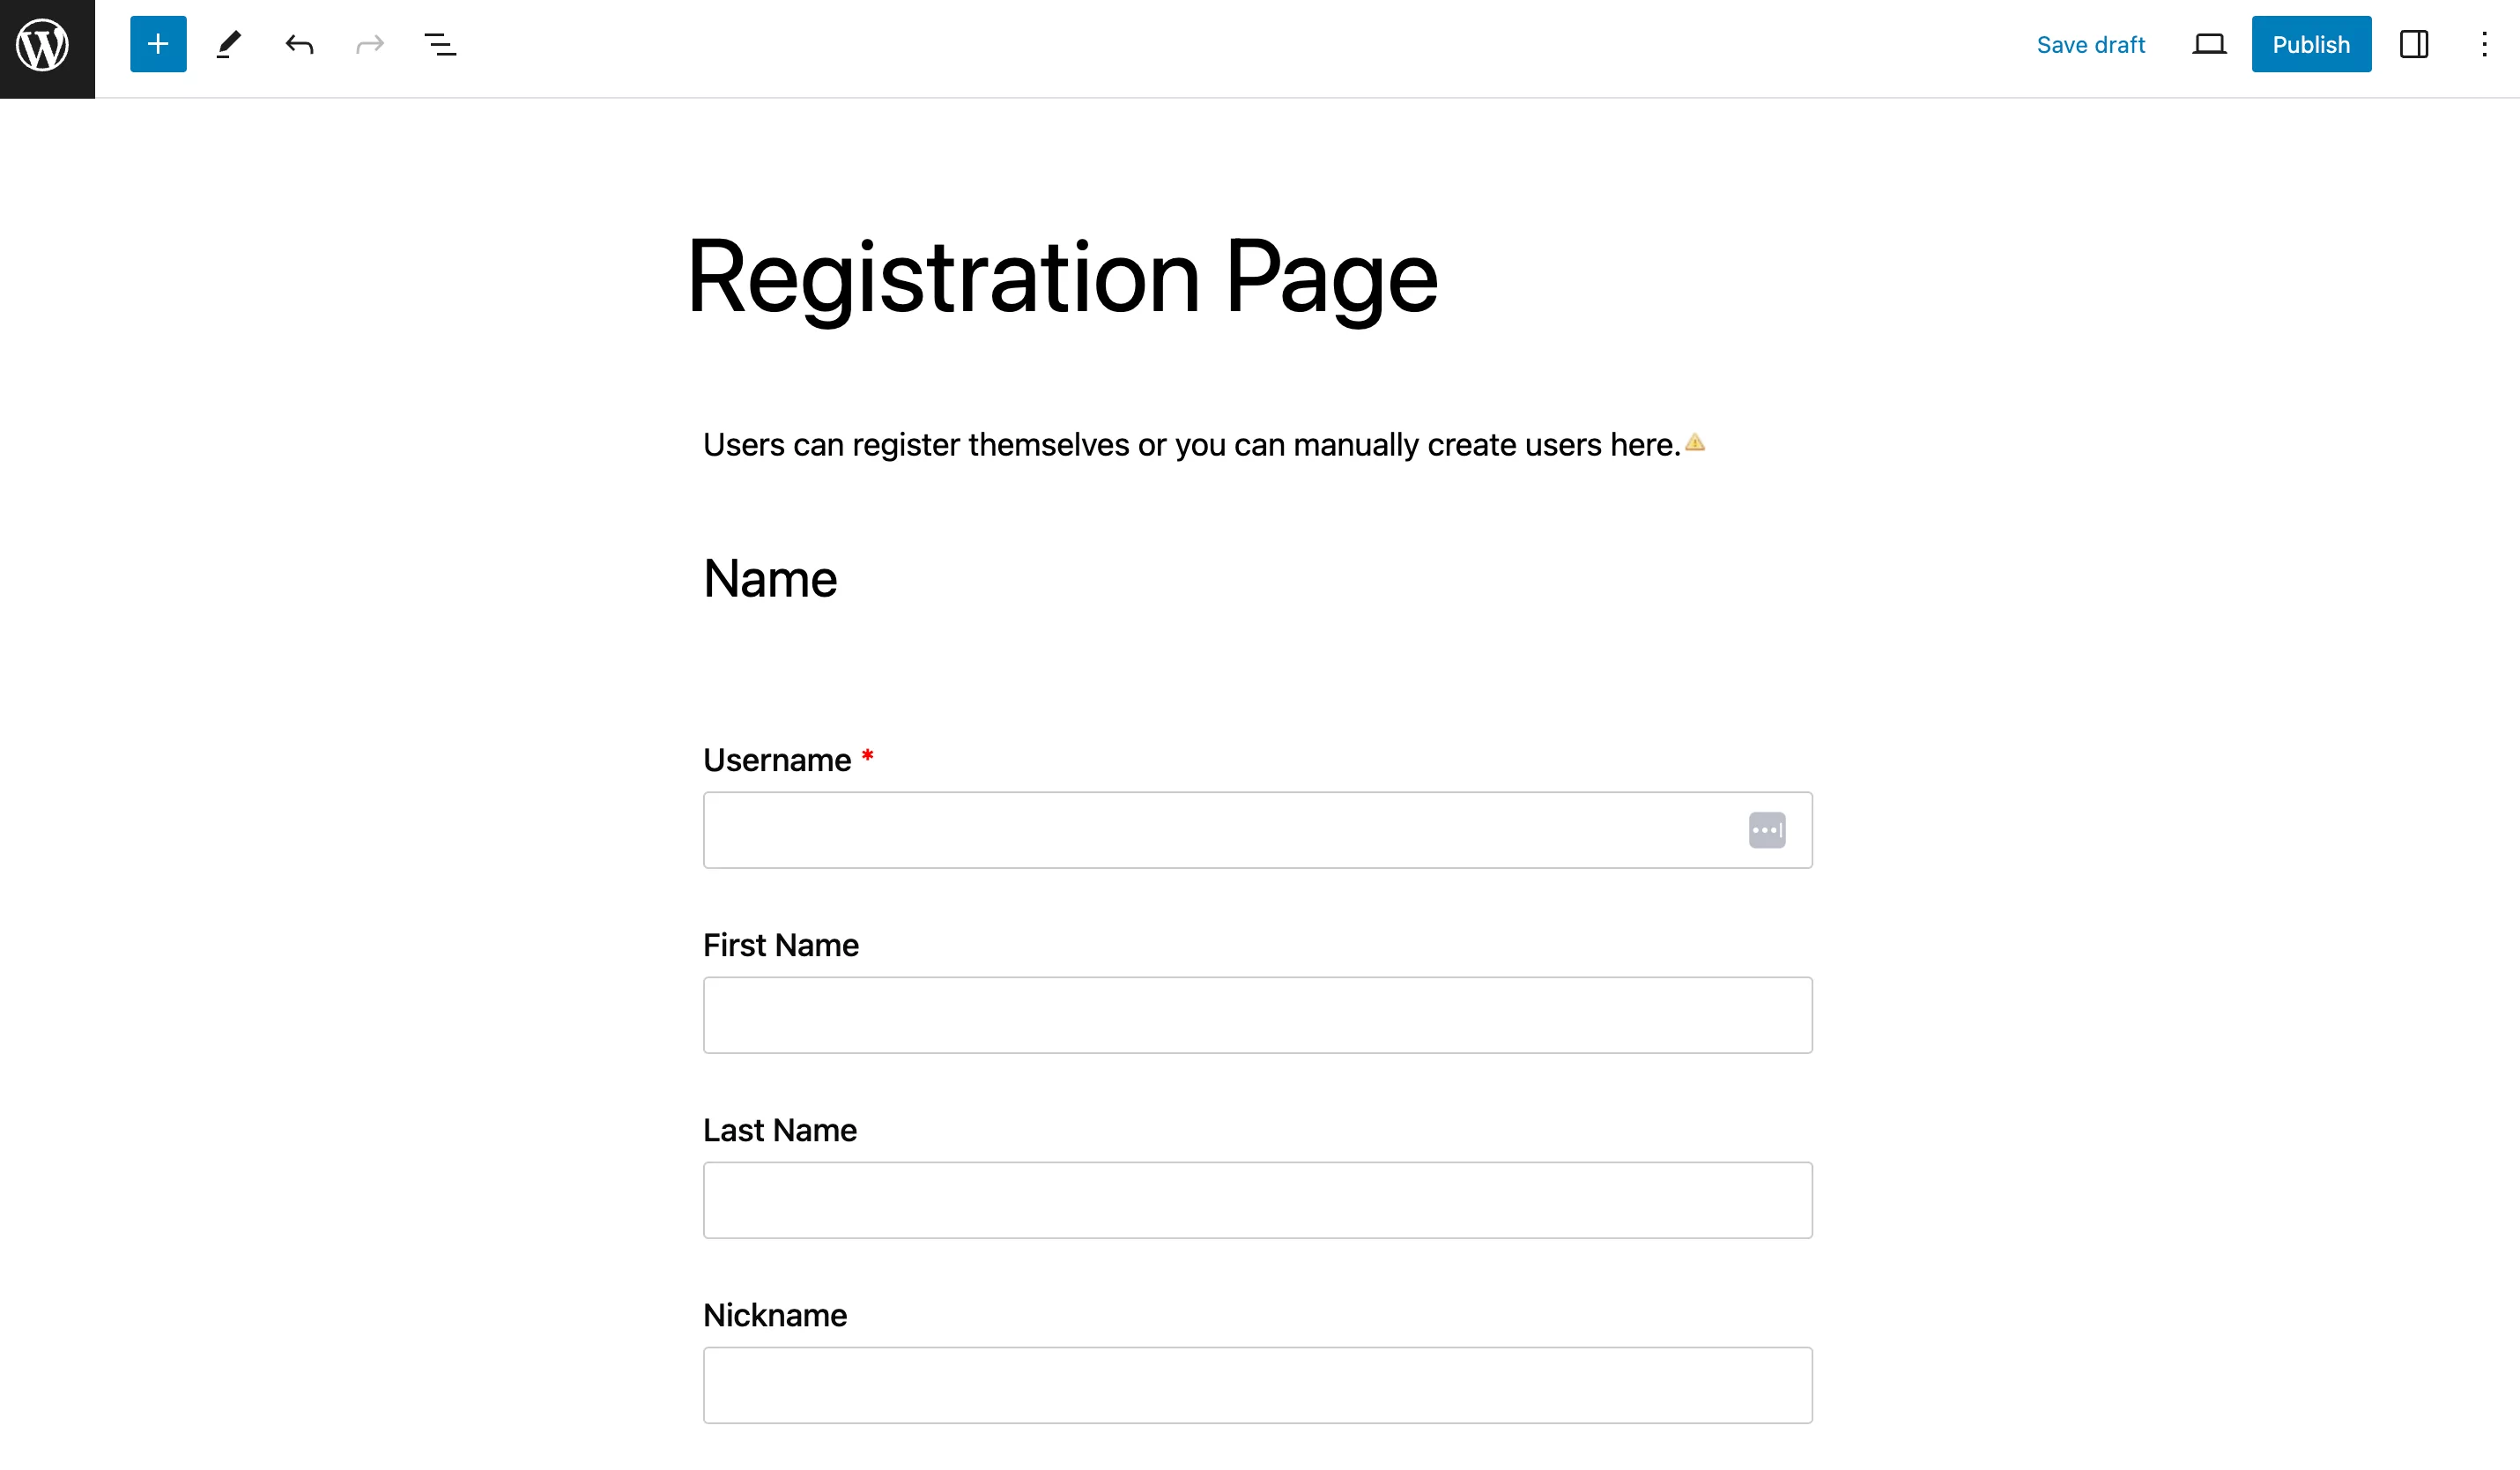 Creating a Registration Page in WordPress to password protect content